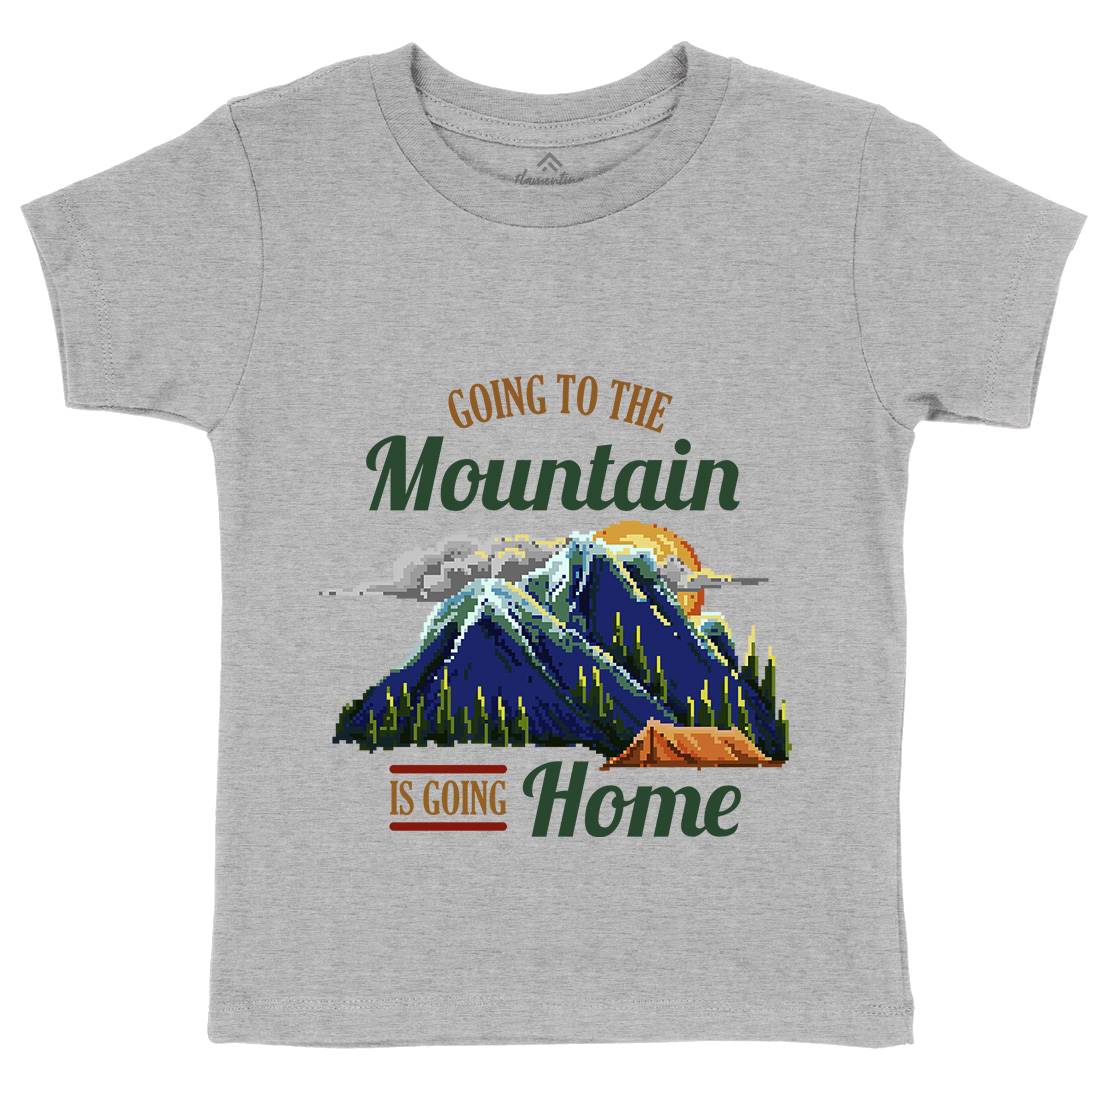 Going To The Mountain Kids Crew Neck T-Shirt Nature B905